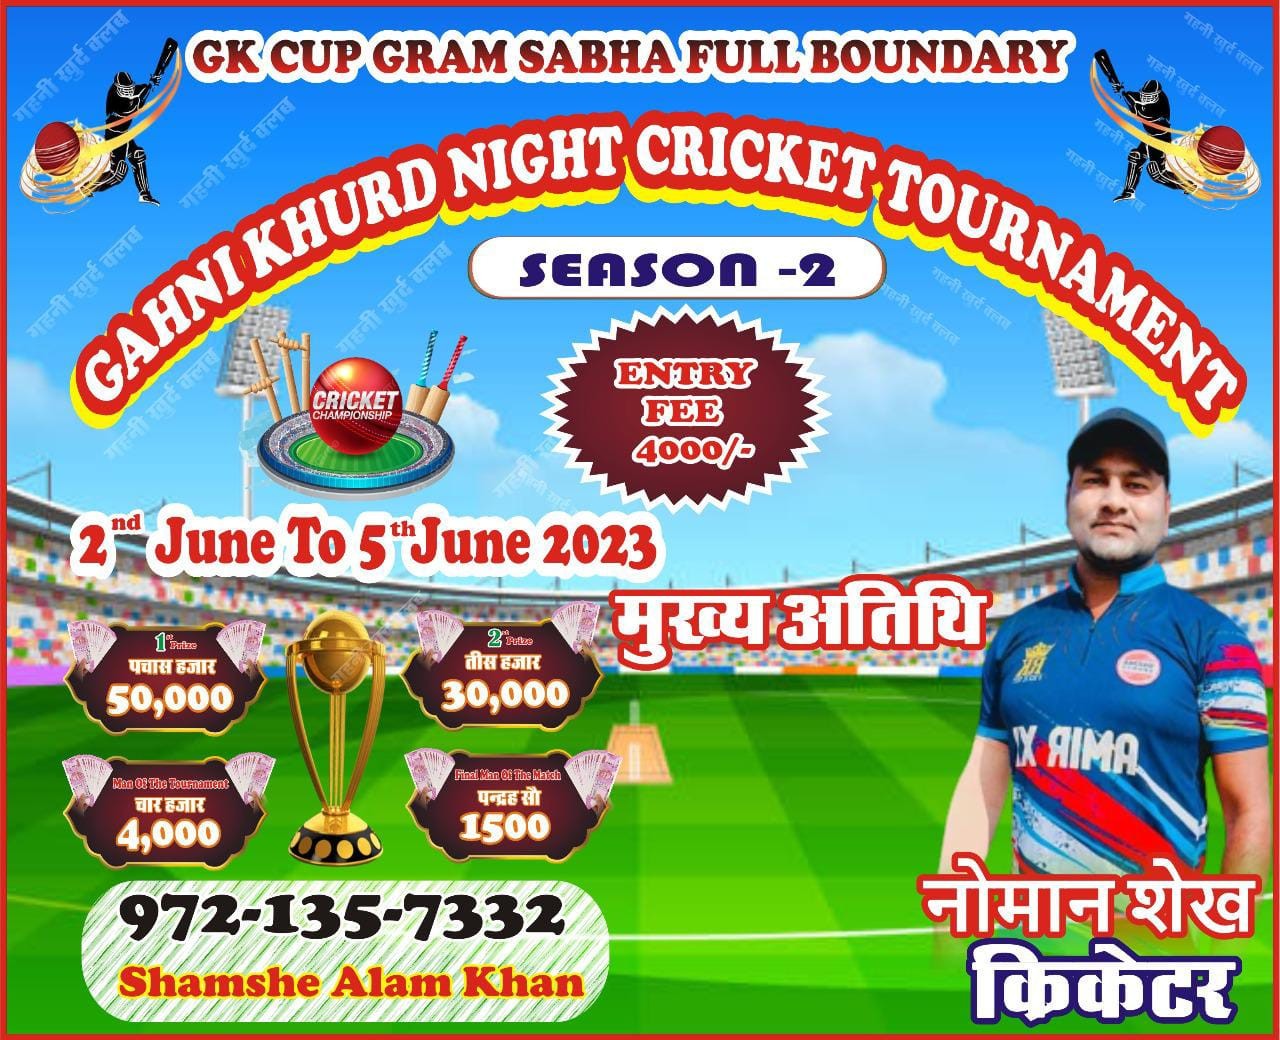 GK Cup